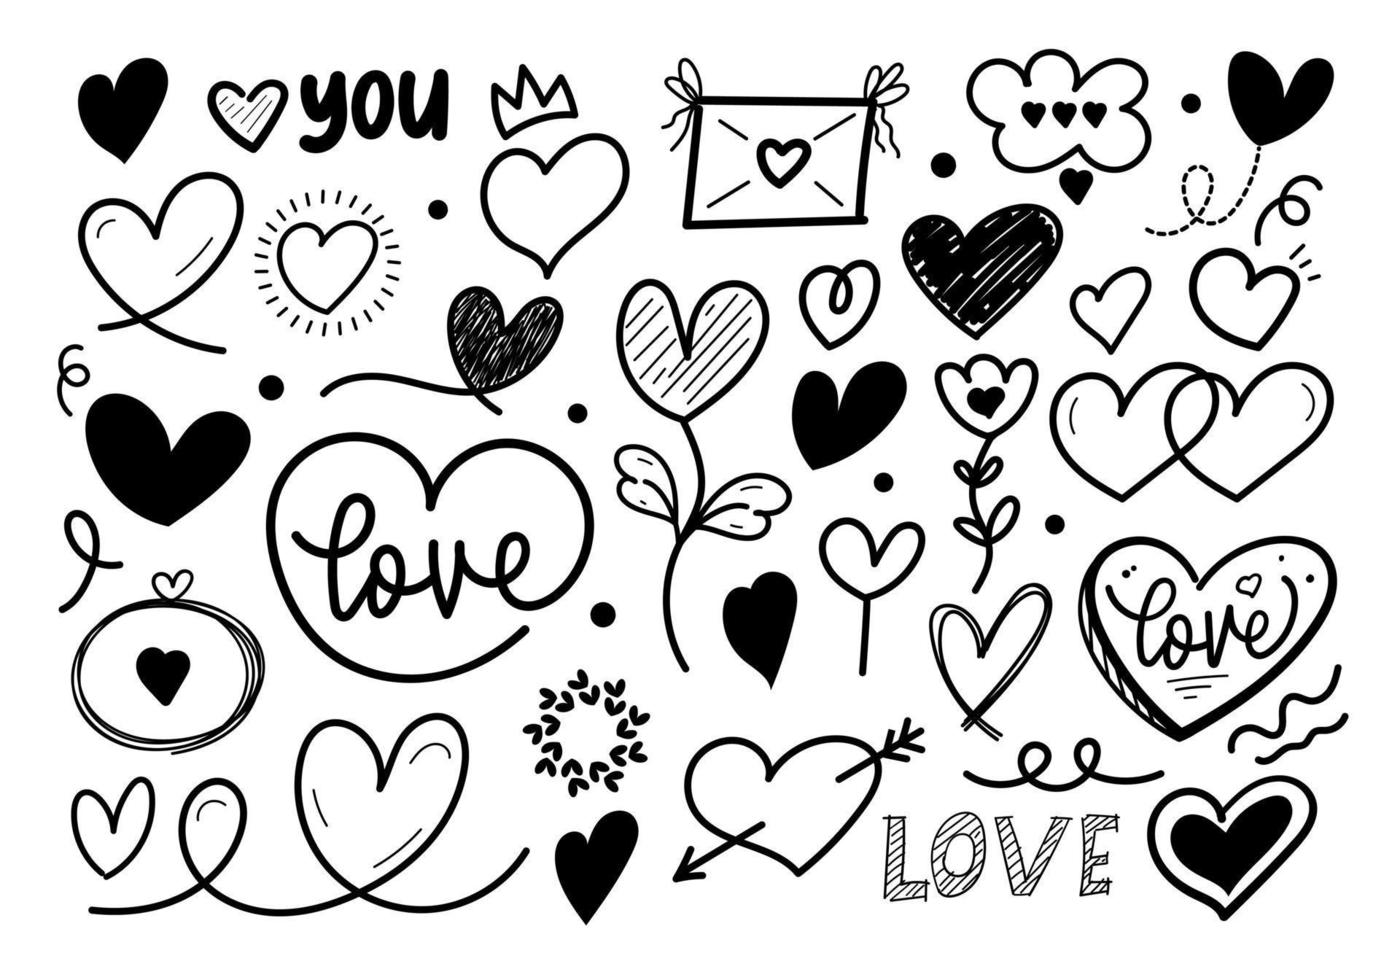 Hand drawn heart hearts love valentines day doodle scribble black line art sketch icon set vector illustration